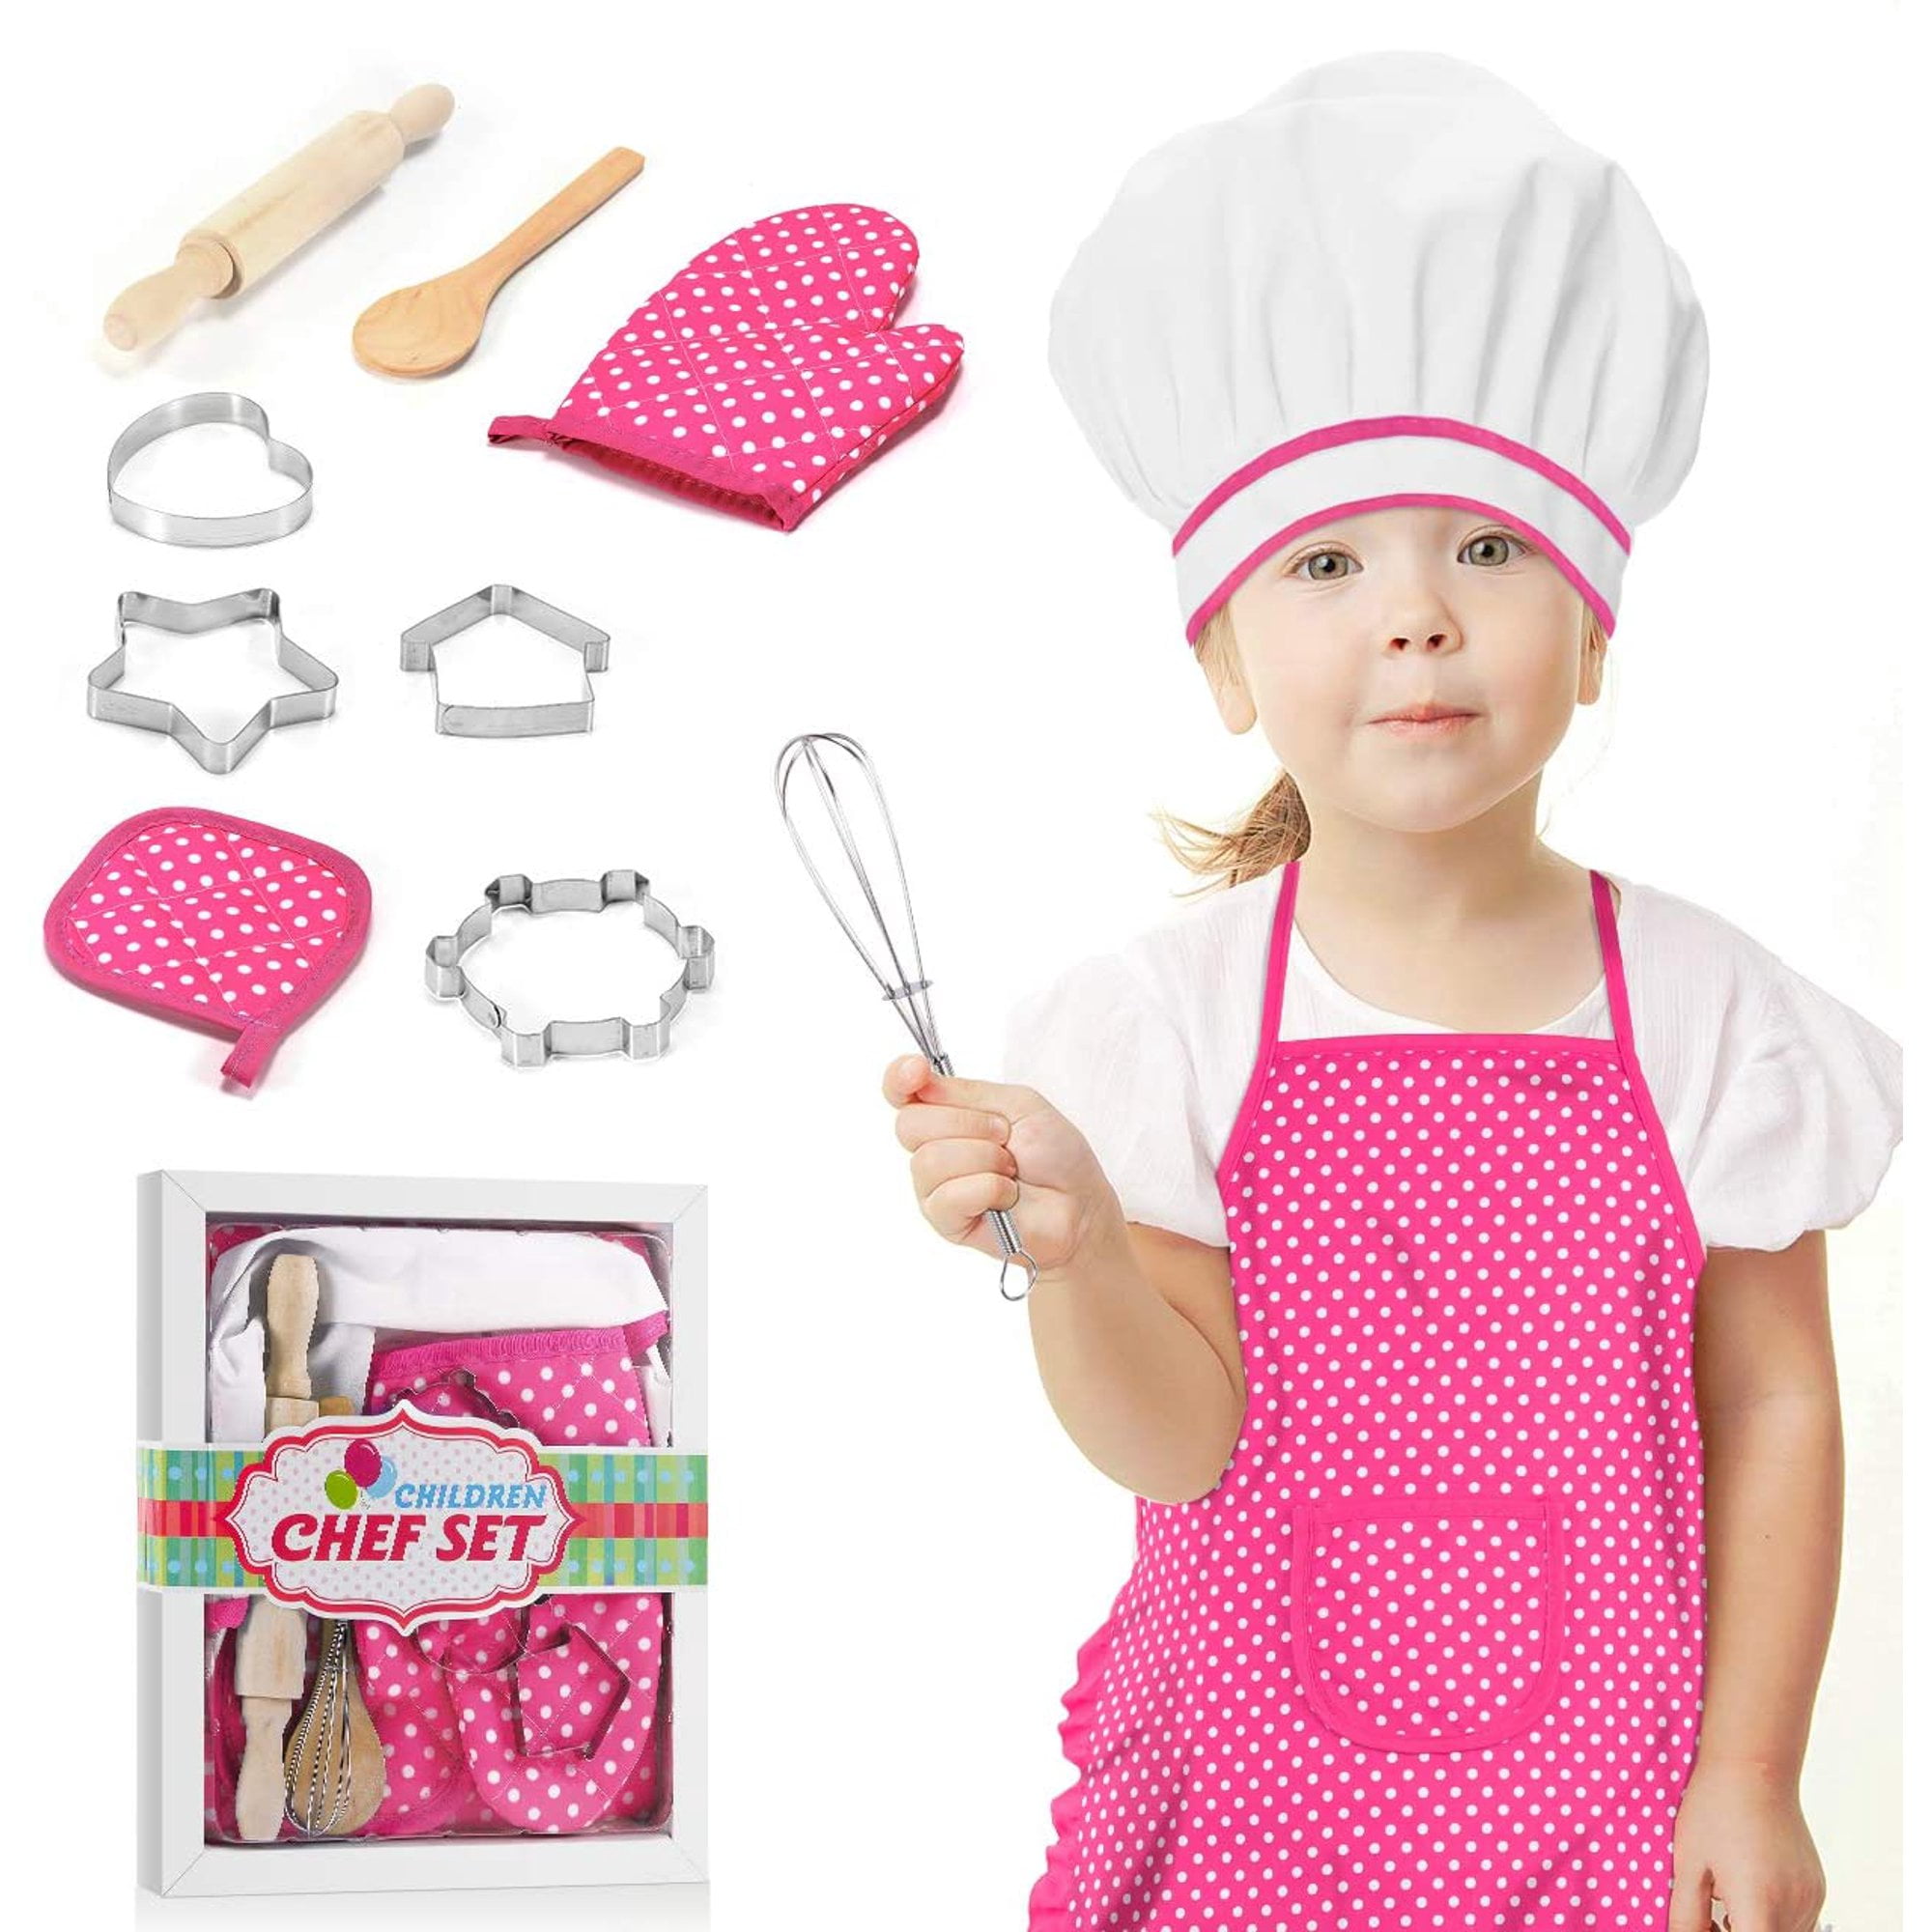 Kids Chef Role Play Costume Set Includes Apron 15 Pieces Baking Sets for 3 Year Olds Kids and Up Chef Hat for Kids Chef Set Toddler Dress up Pretend Play Cooking Chef Costume Set 